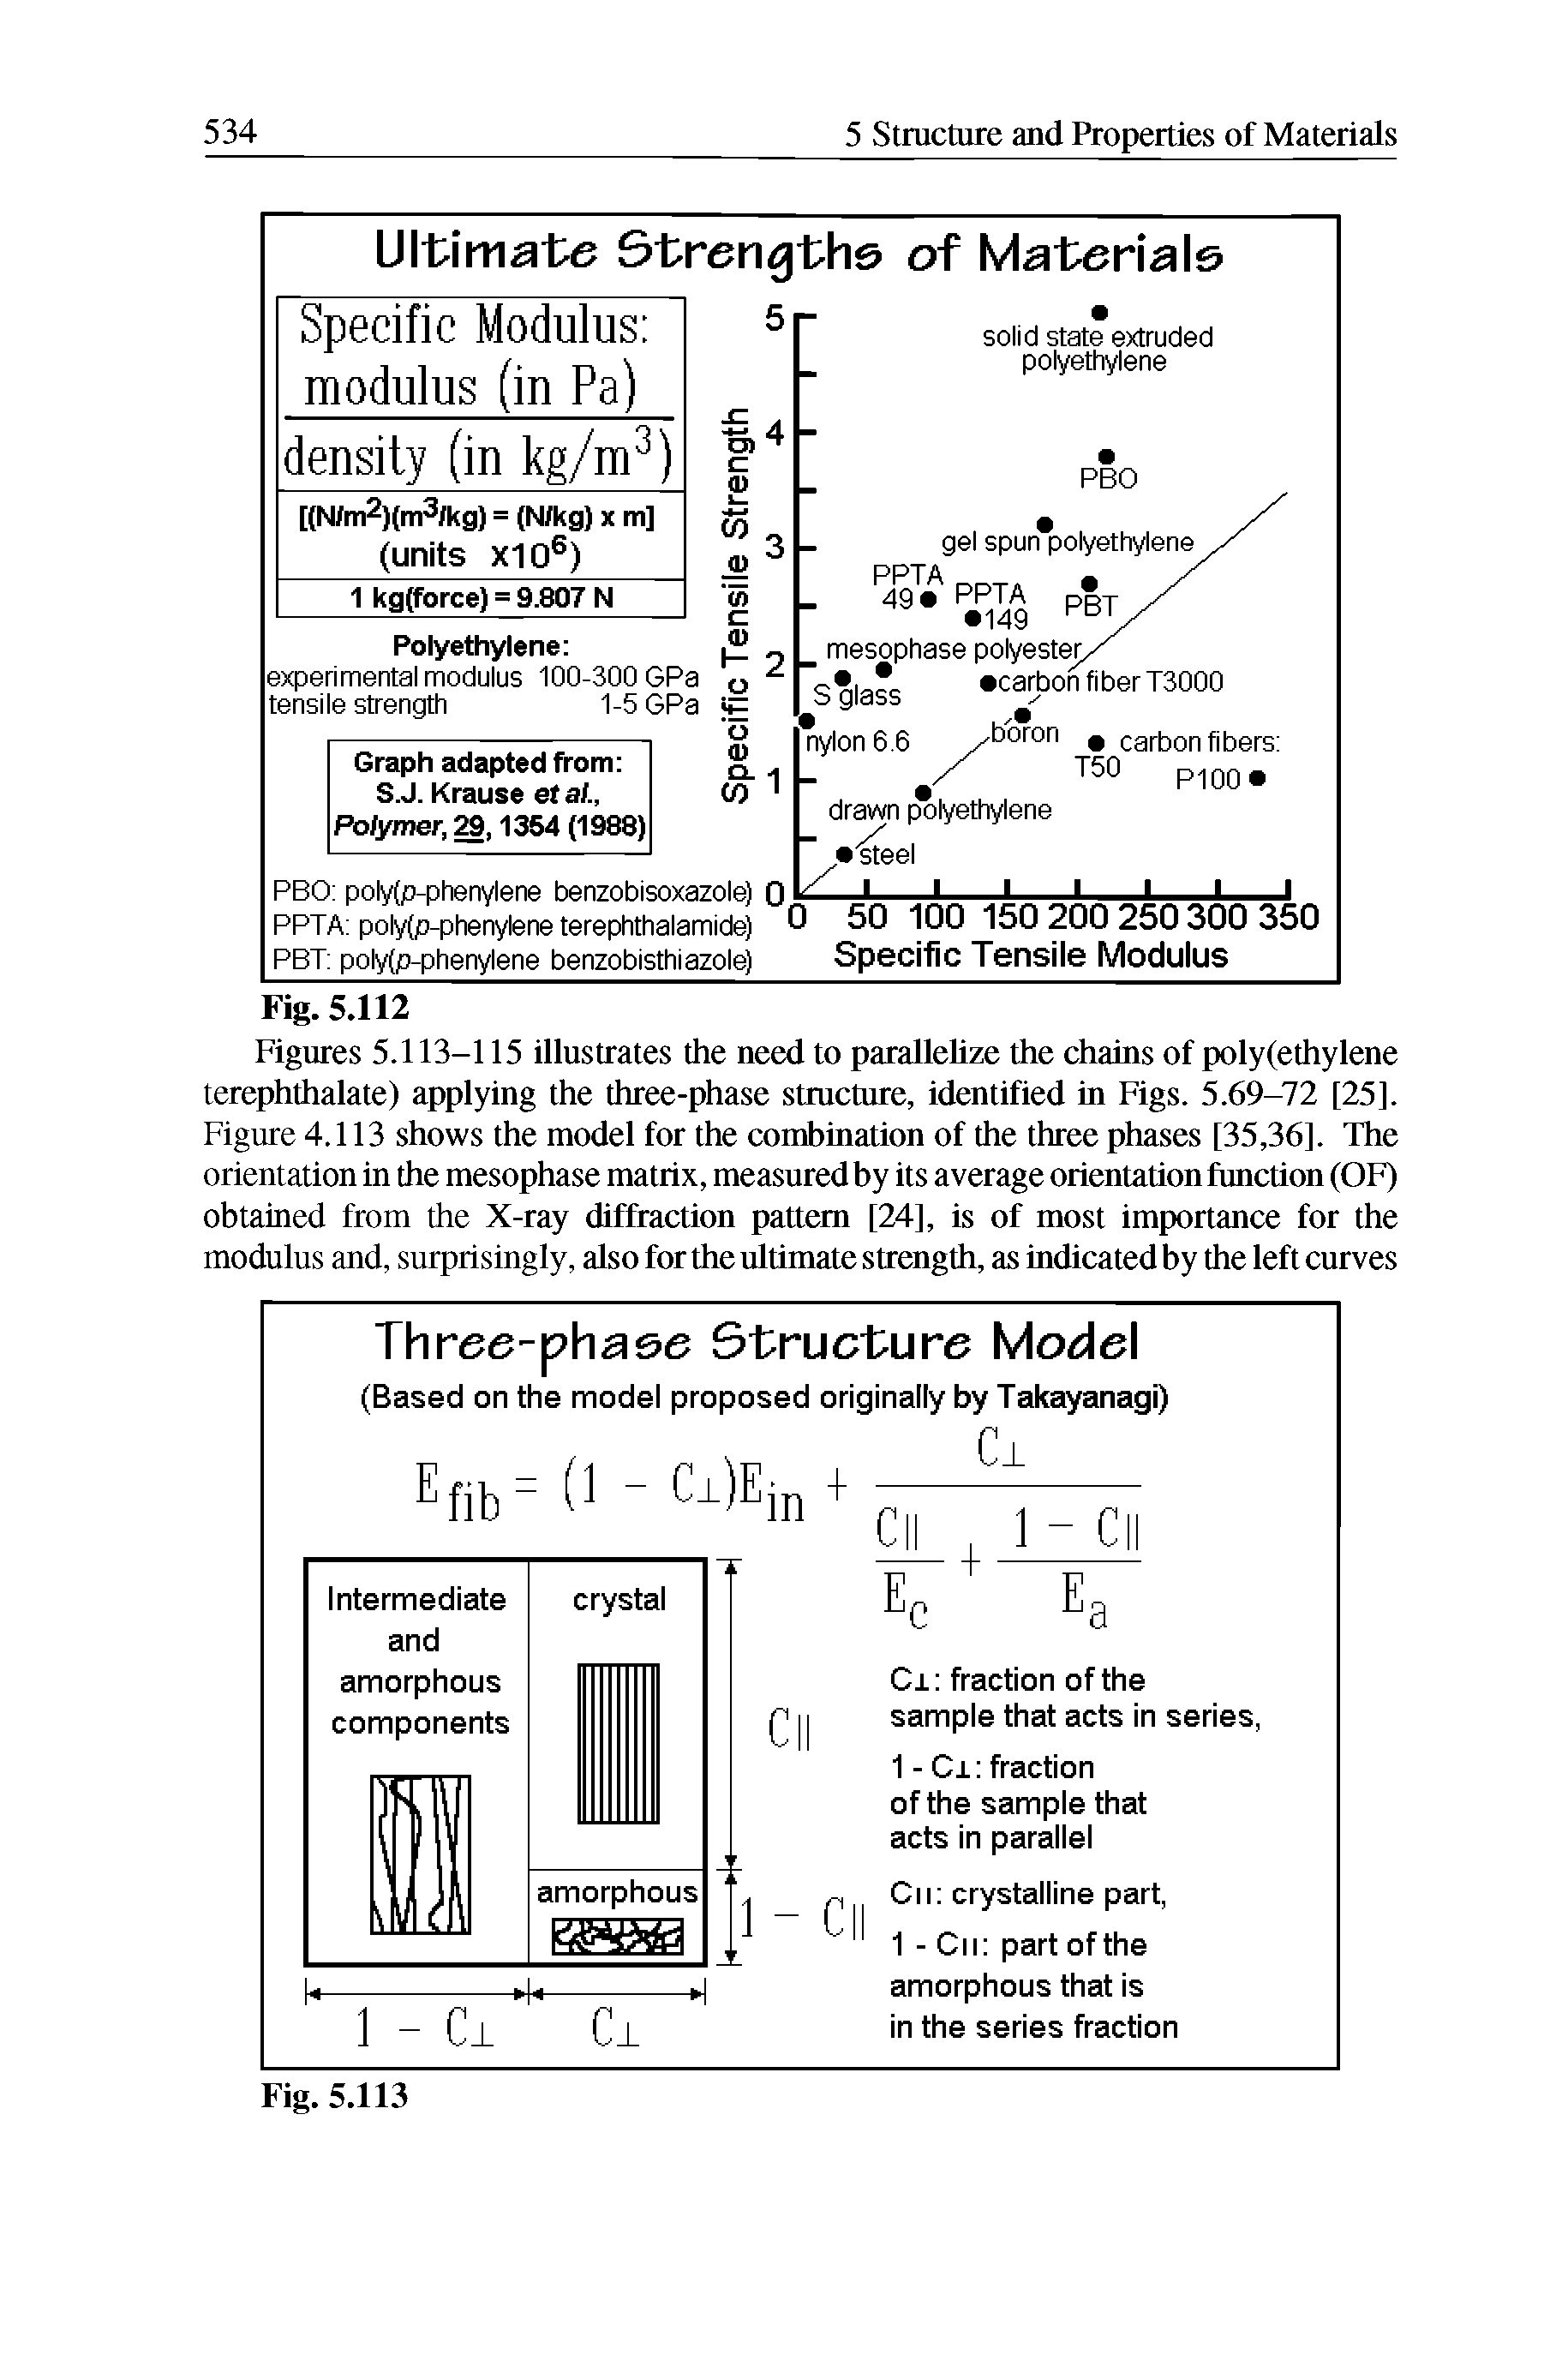 Figures 5.113-115 illustrates the need to parallelize the chains of poly(ethylene terephthalate) applying the three-phase structure, identified in Figs. 5.69-72 [25]. Figure 4.113 shows the model for the combination of the three phases [35,36]. The orientation in the mesophase matrix, measured by its average orientation function (OF) obtained from the X-ray diffraction pattern [24], is of most importance for the modulus and, surprisingly, also for the ultimate strength, as indicated by the left curves...